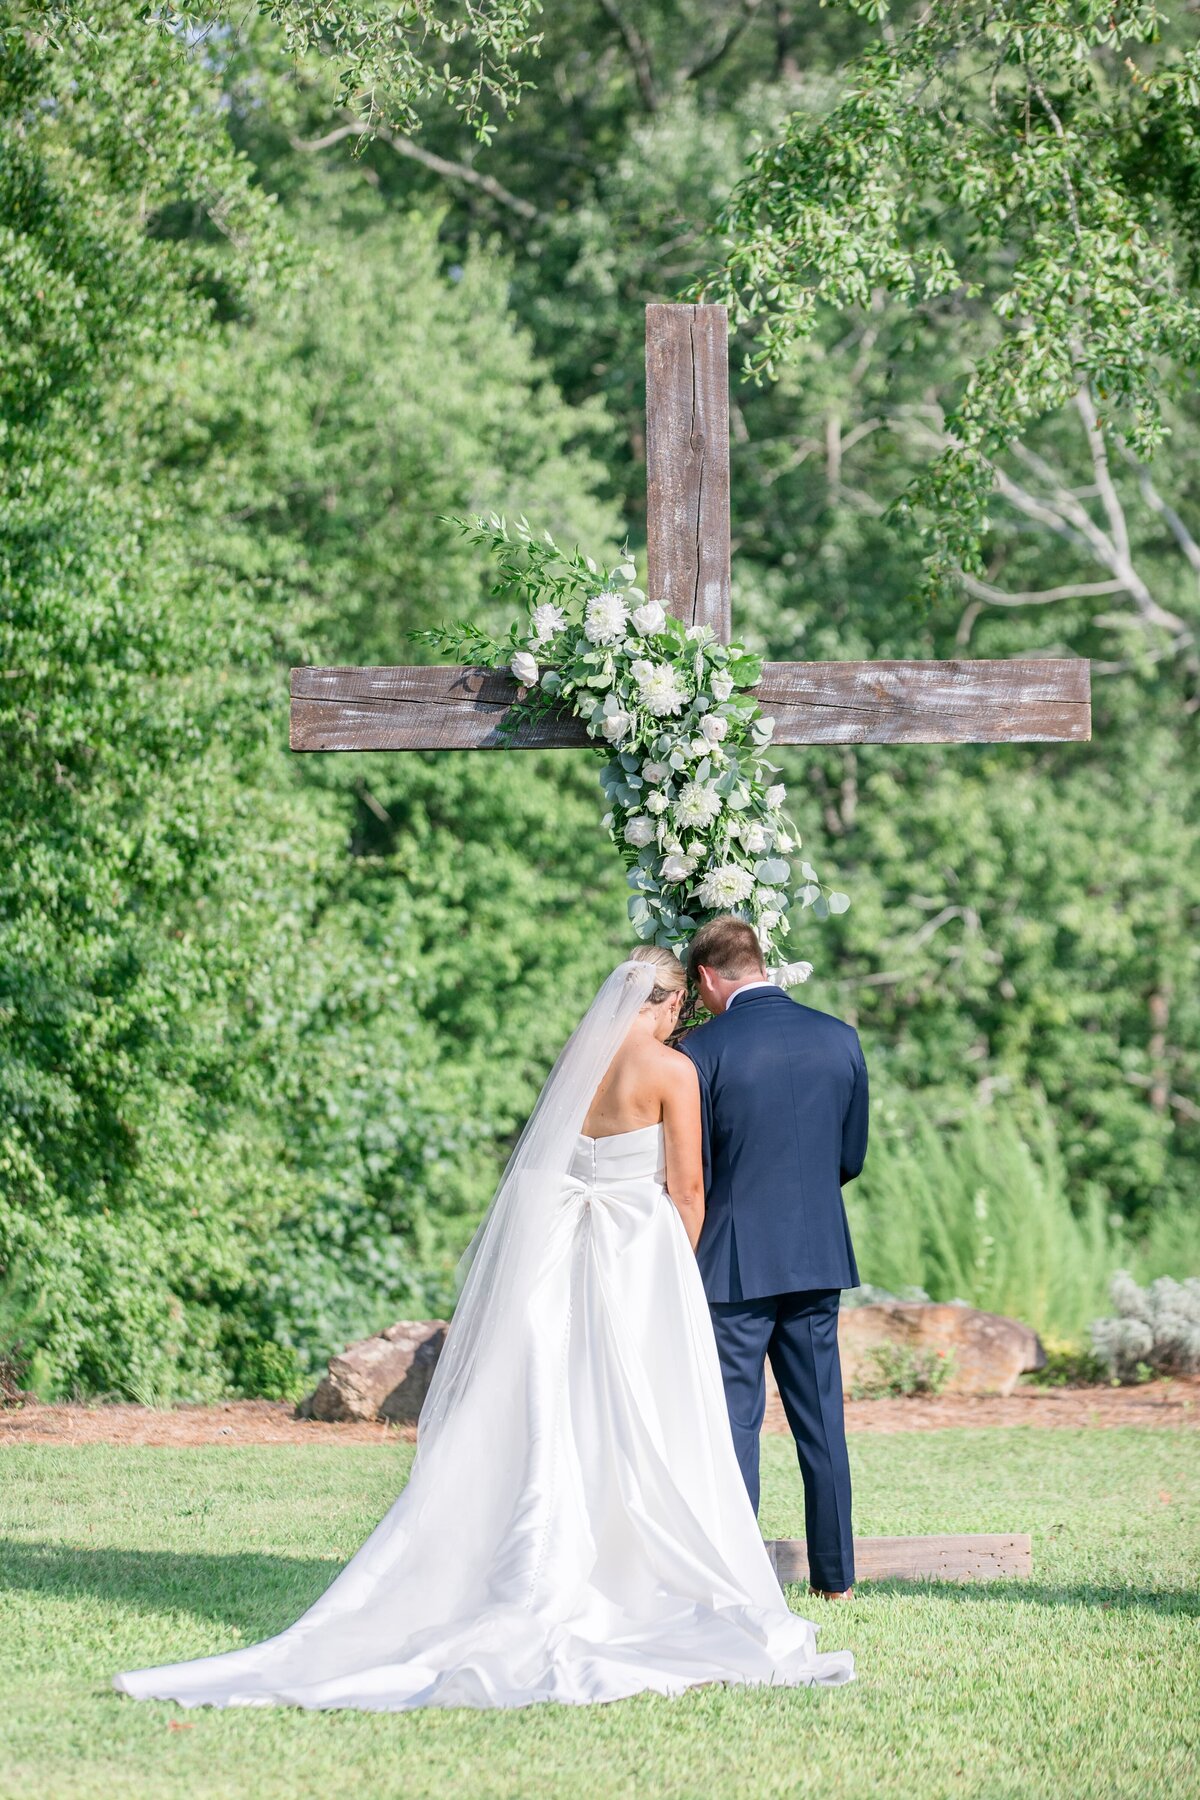 katie_and_alec_wedding_photography_wedding_videography_birmingham_alabama_husband_and_wife_team_photo_video_weddings_engagement_engagements_light_airy_focused_on_marriage__legacy_at_serenity_farms_wedding_82